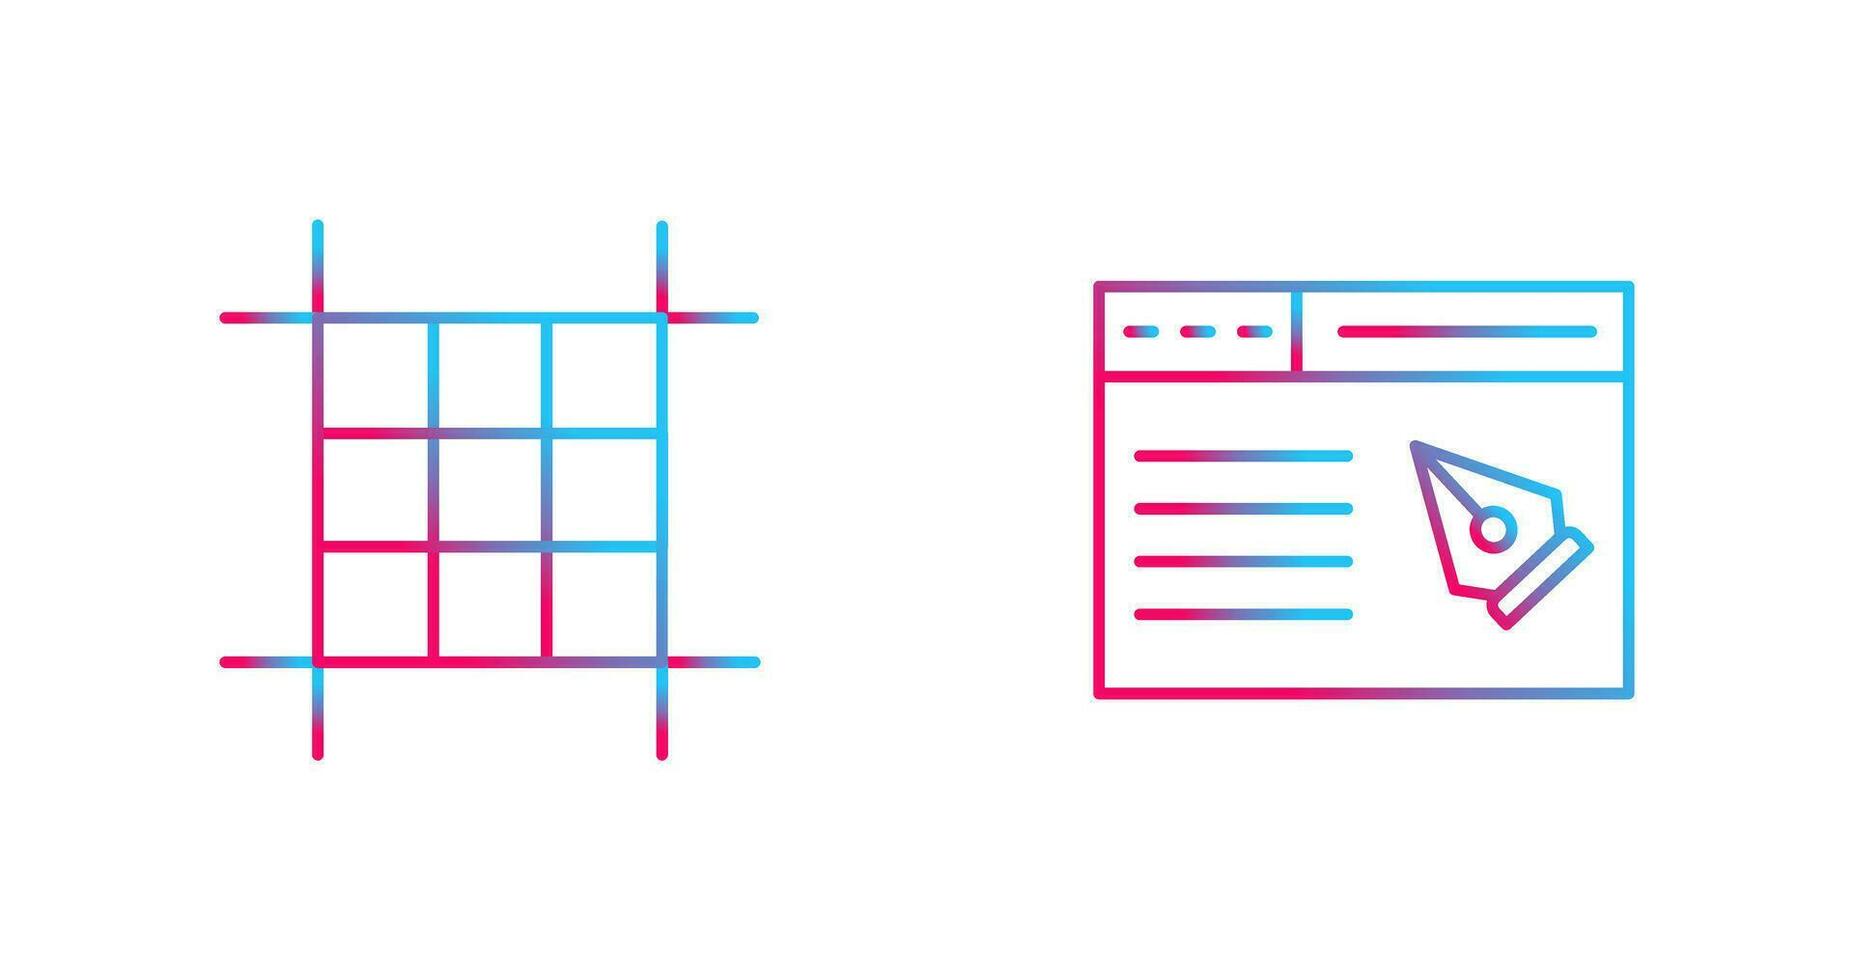 Square Layout and Web Page Icon vector